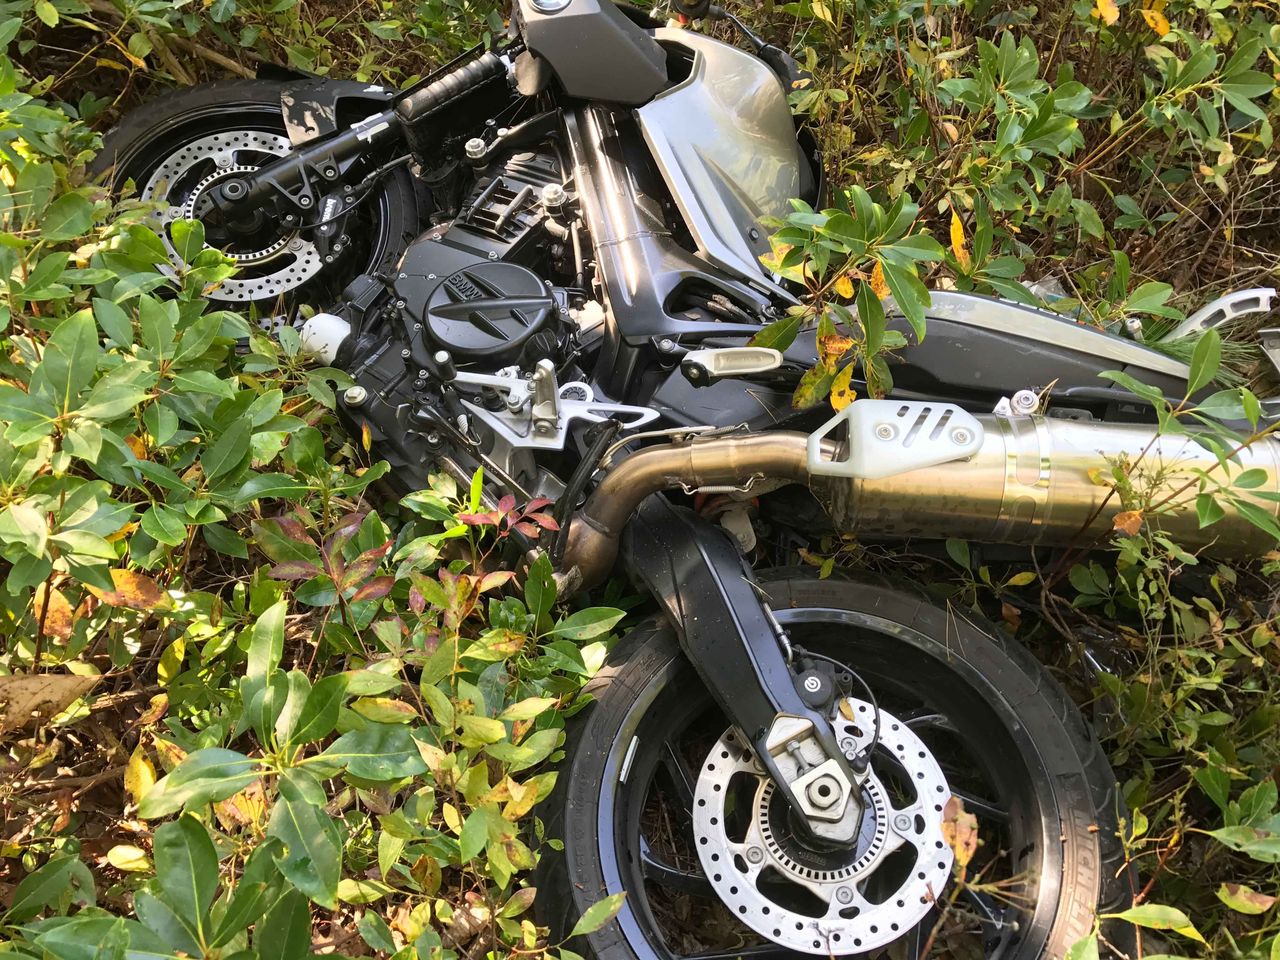 The deceased BMW F800R was so far into the forest we could not see it from the road